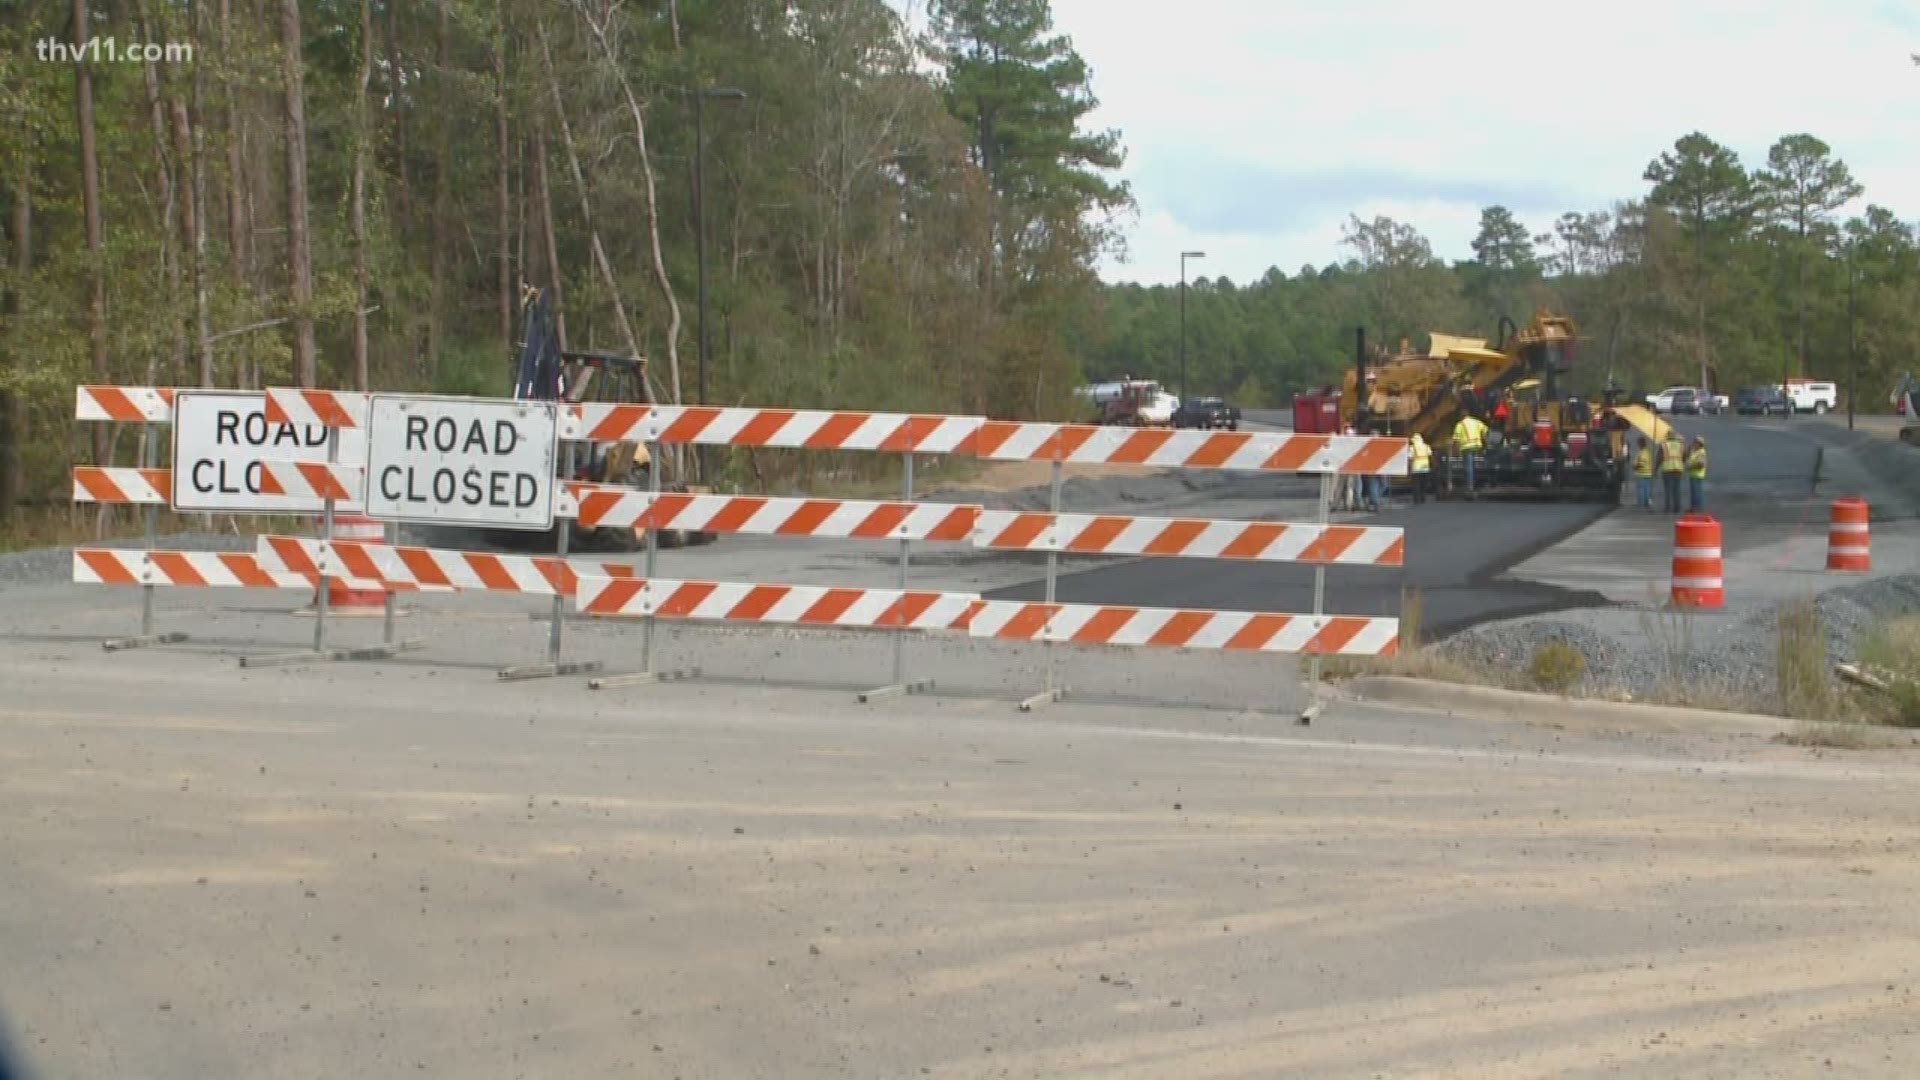 People living in a closed-off neighborhood near the new Maumelle interchange have gotten used to a temporary exit that may soon close.